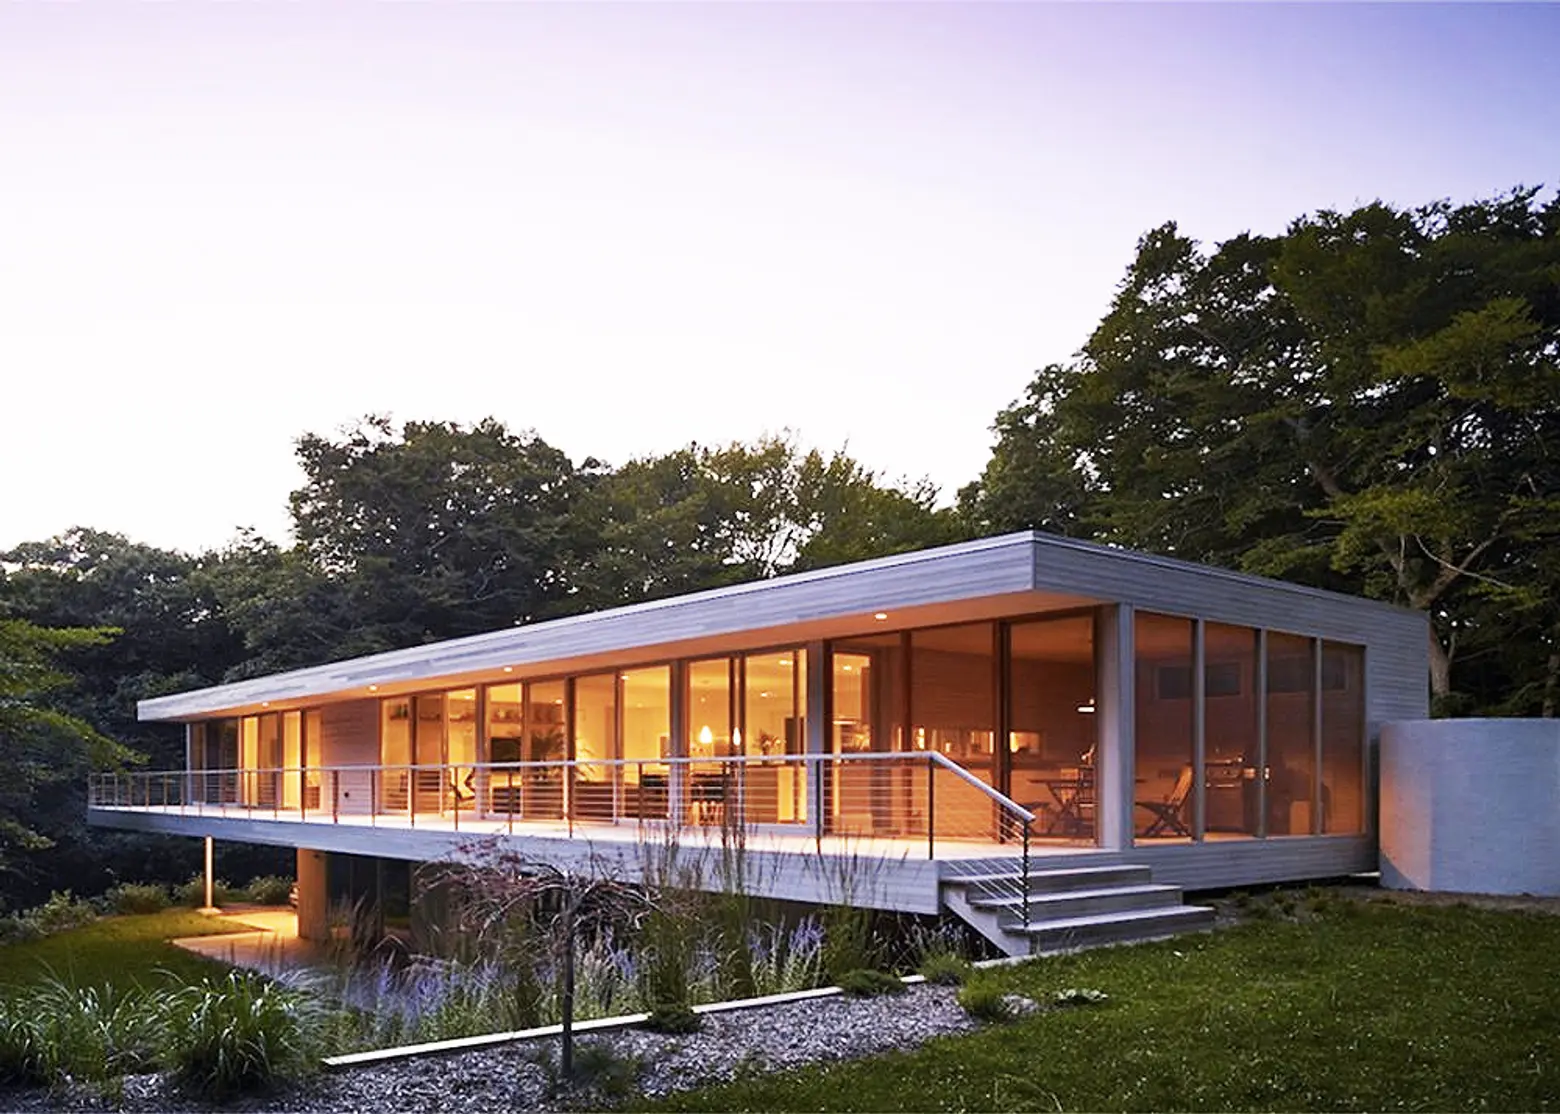 Energy Star-Rated Green Woods House in Amagansett Was Passively Designed